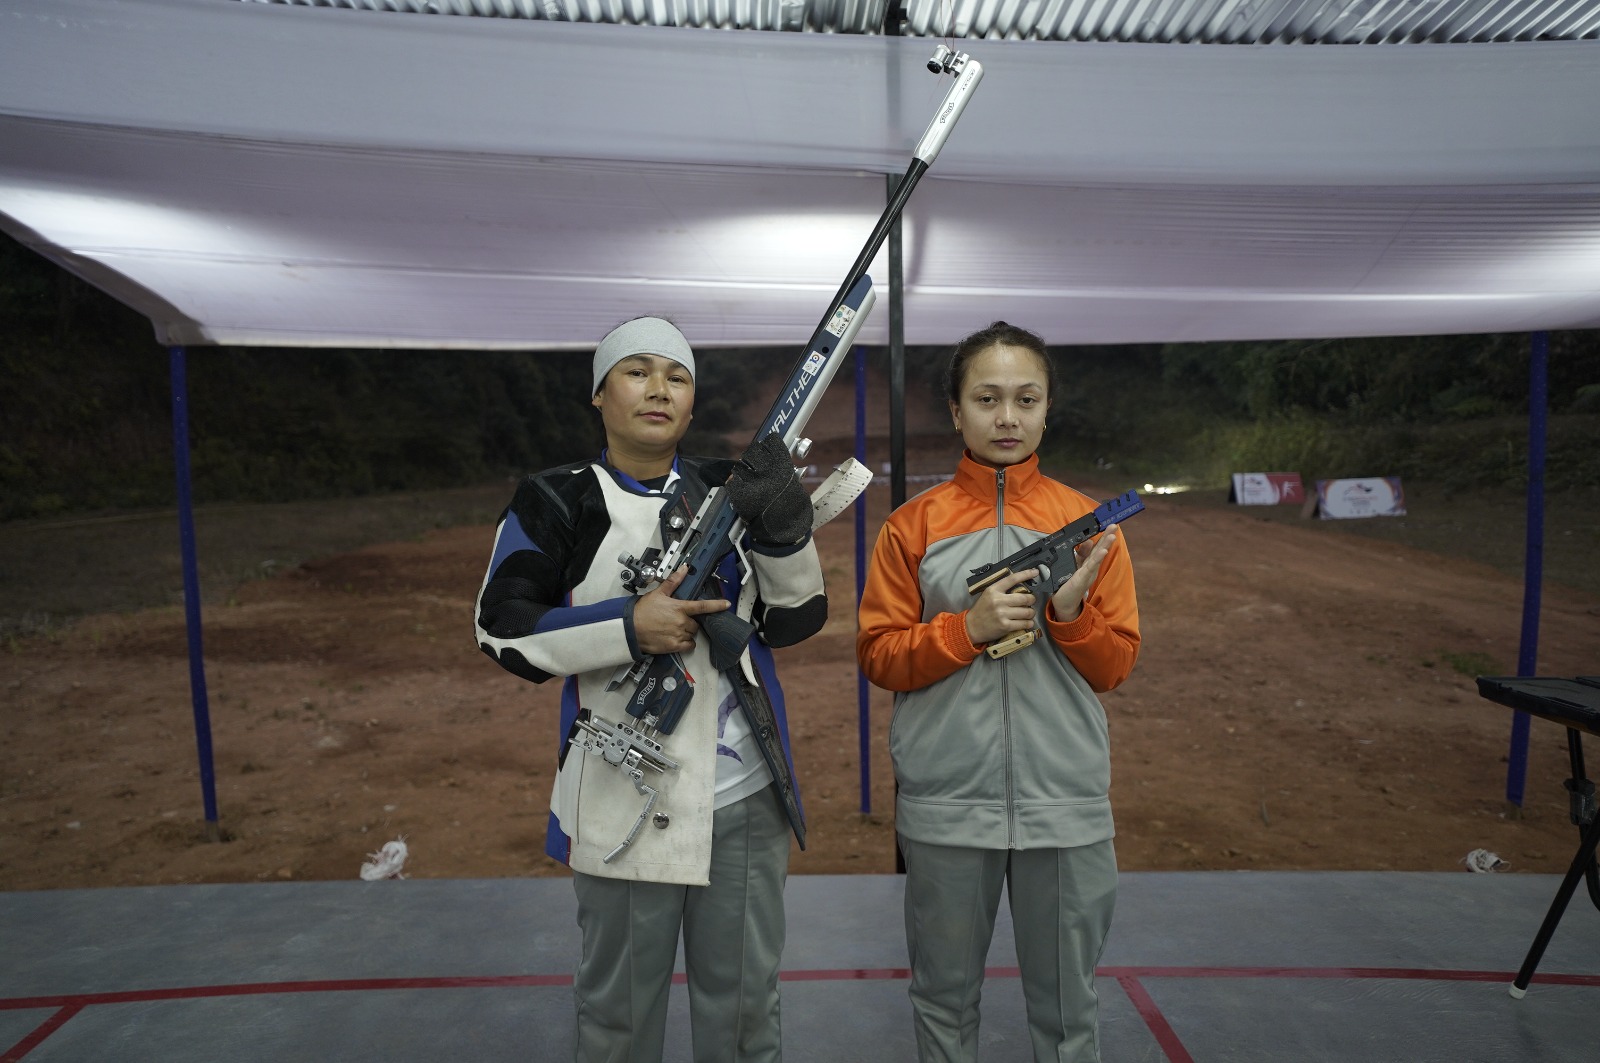 A Meghalayan tale of inspiration: Mother-Daughter as participants at the 5th Meghalaya Games